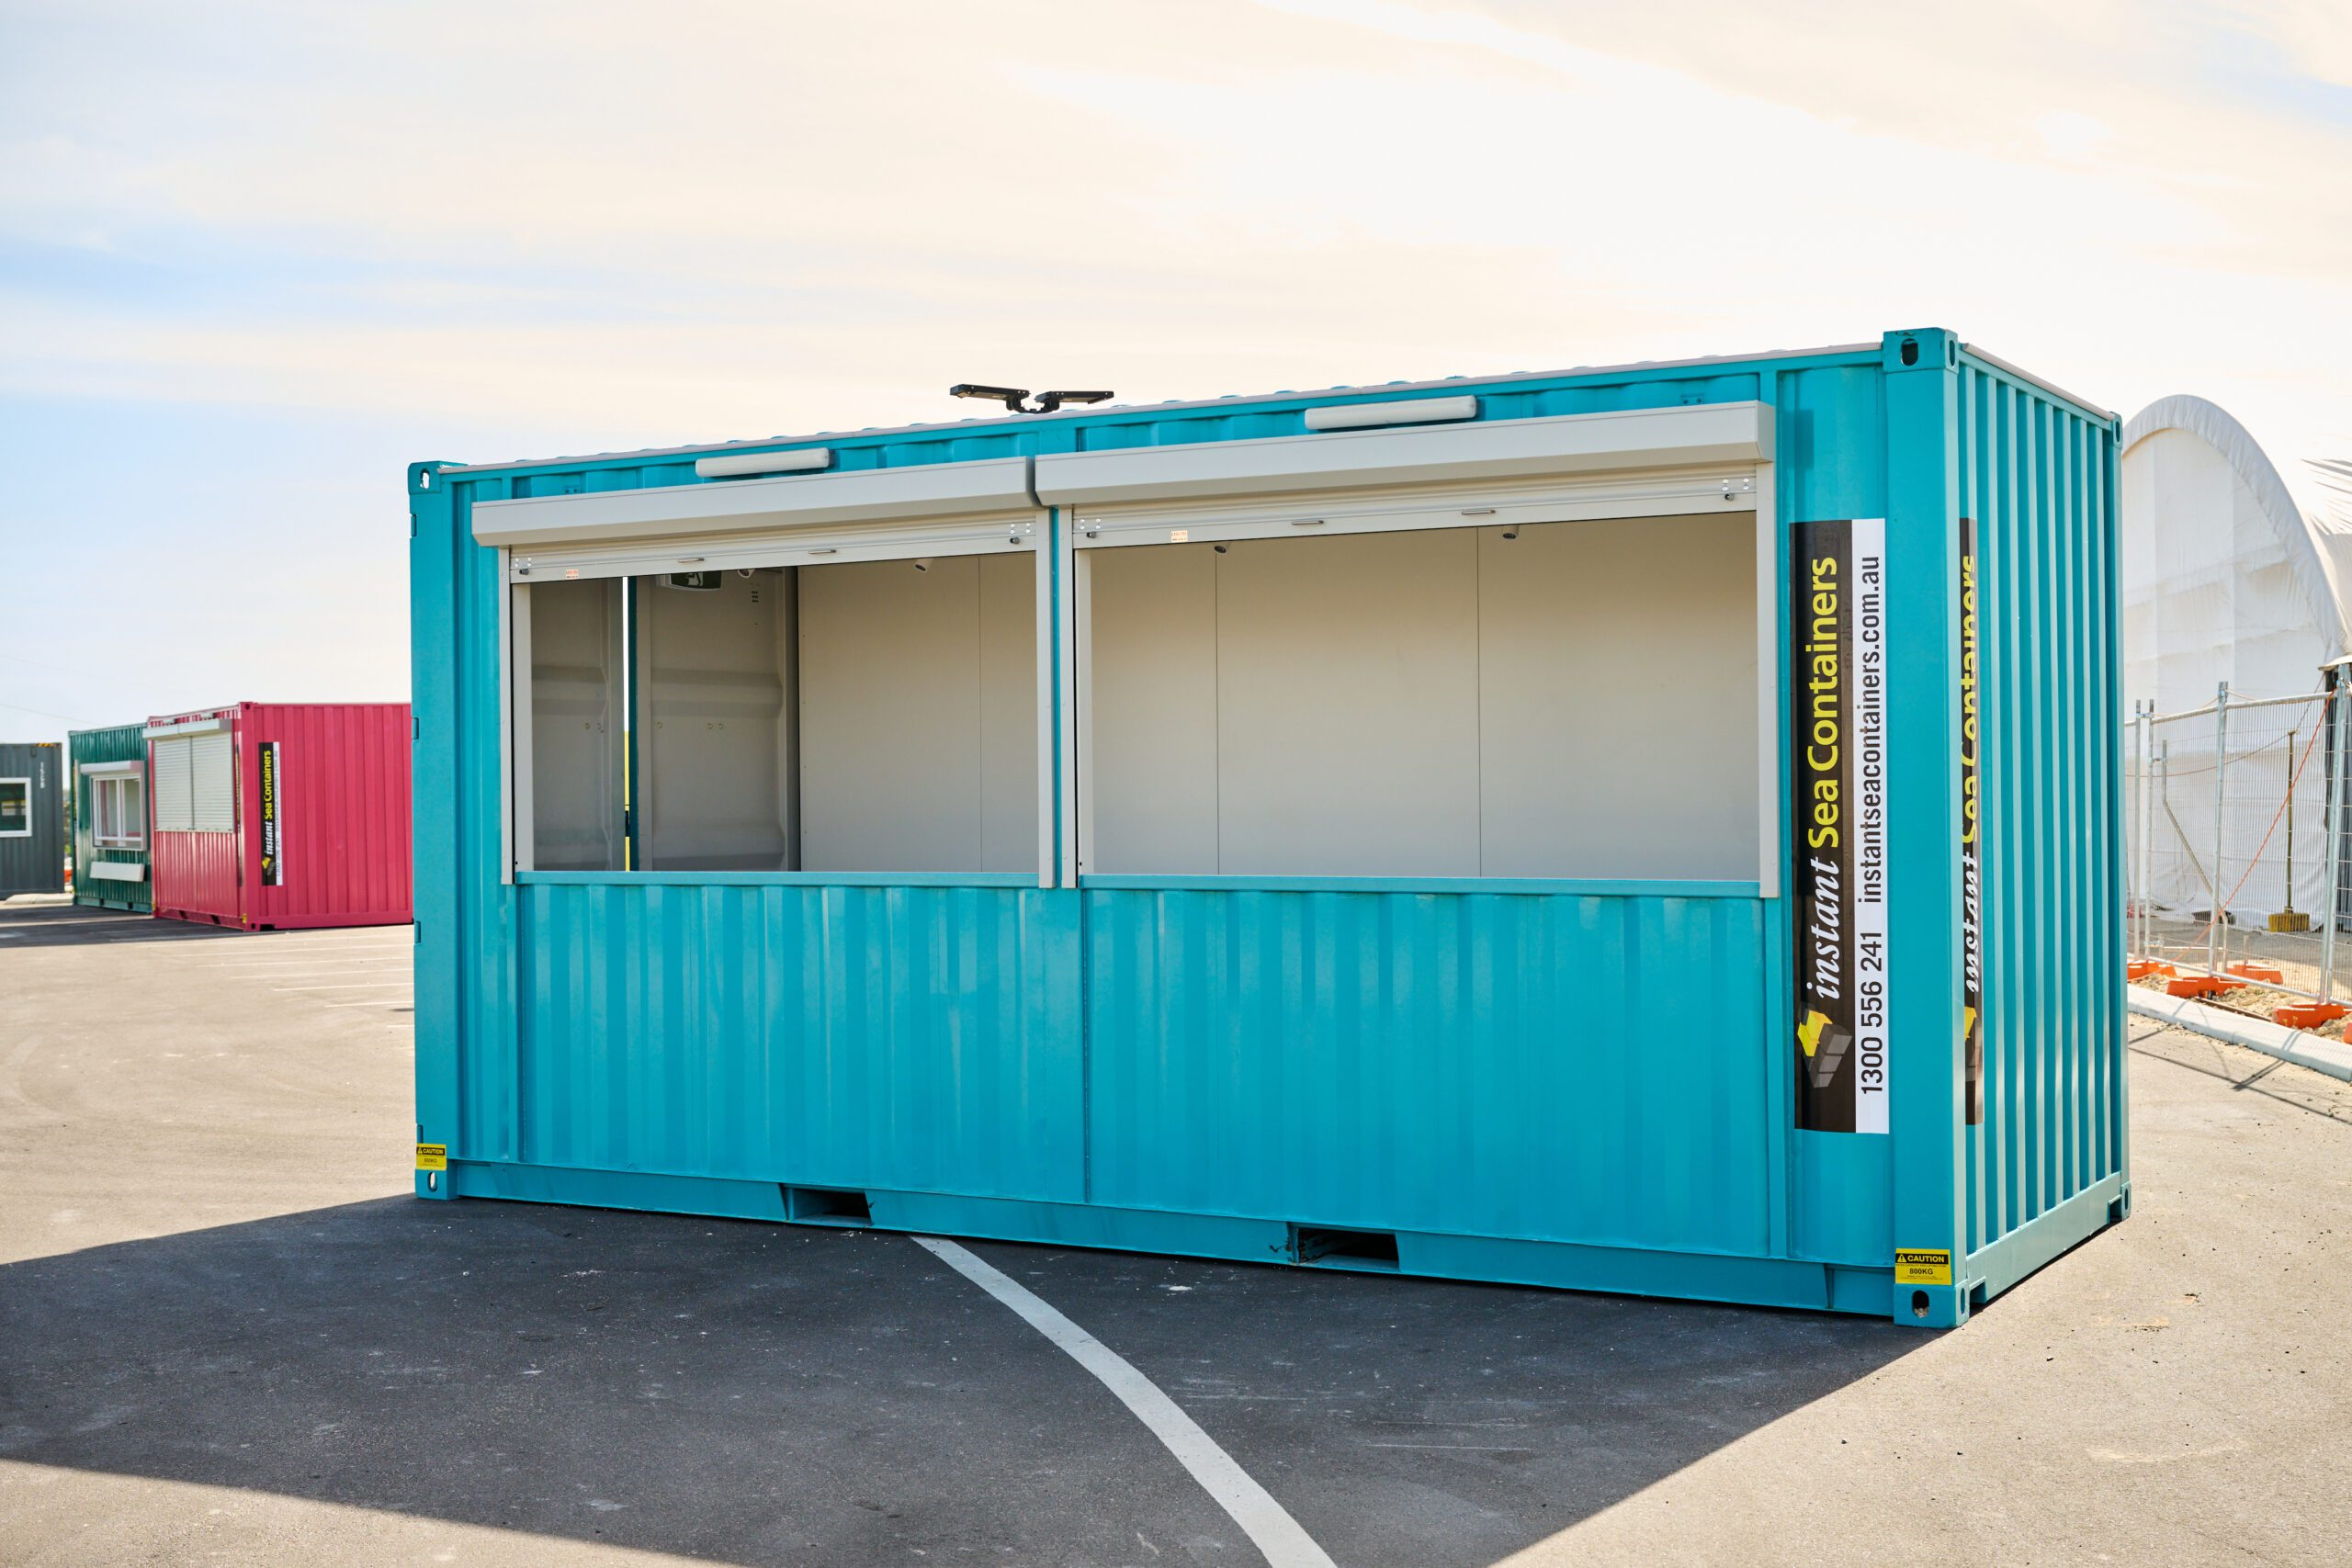 Shipping Container Bar, painted in an attractive teal color, featuring large open windows suitable for serving customers or for display purposes.